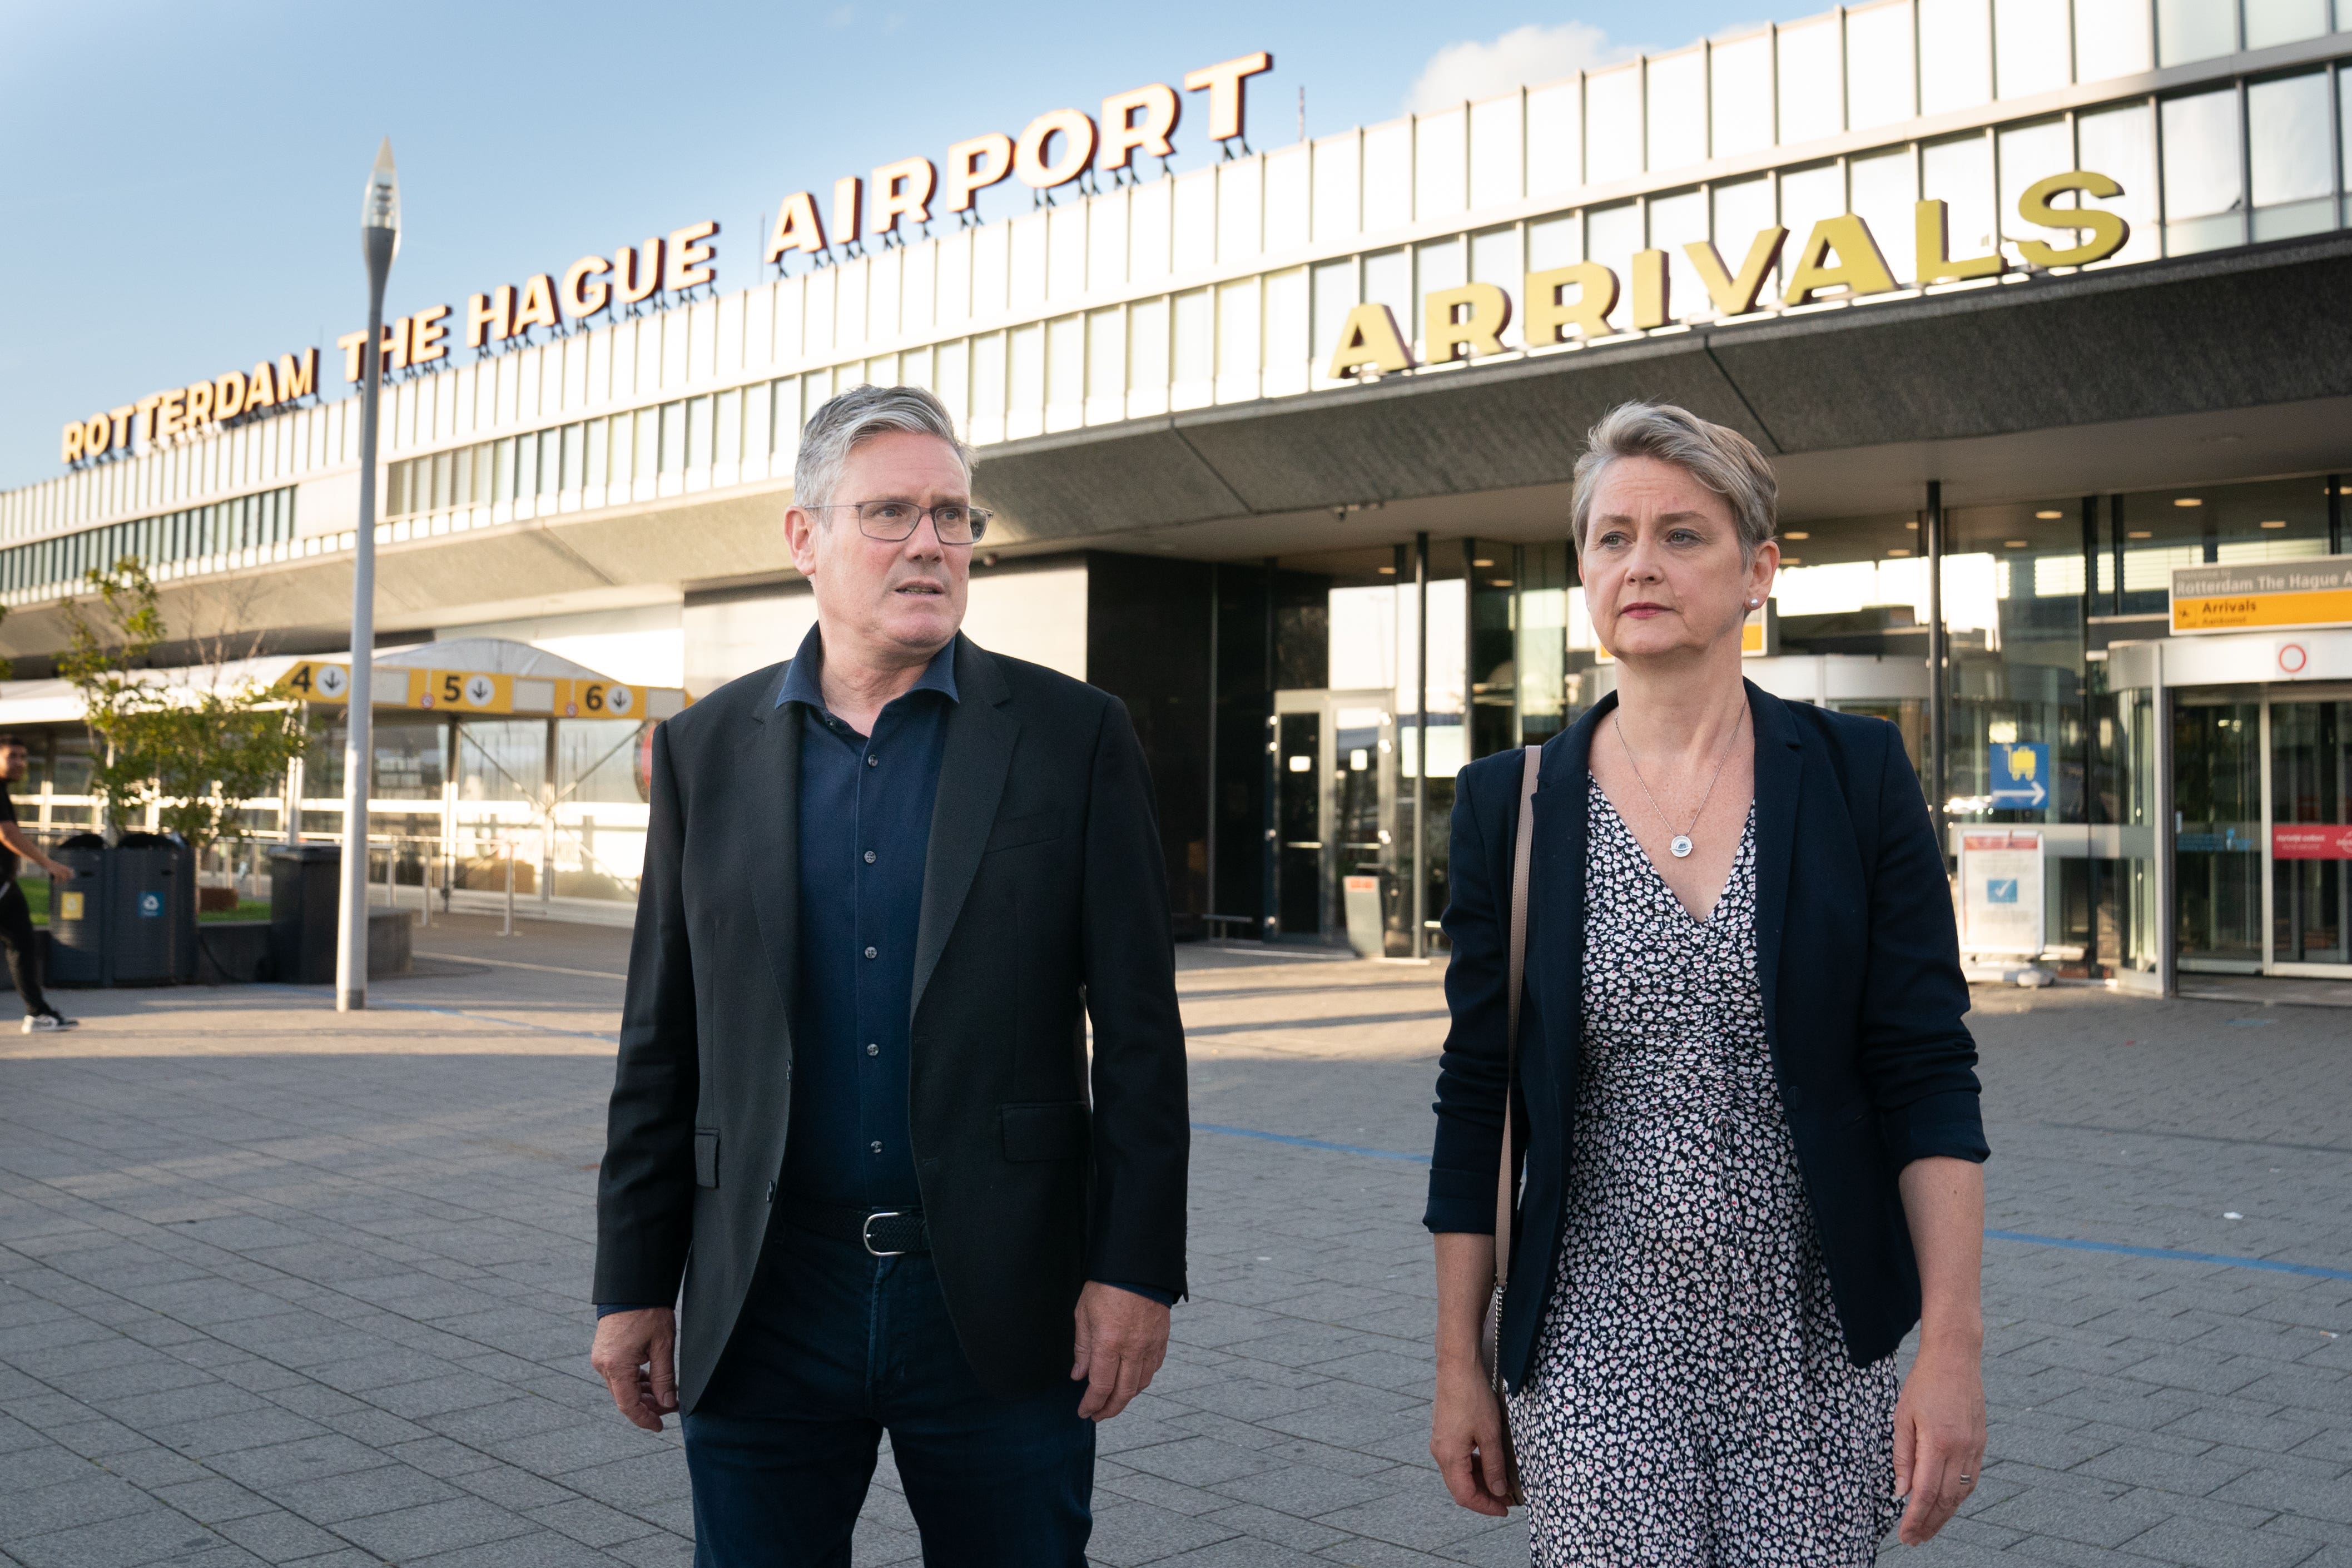 Labour leader Sir Keir Starmer and shadow home secretary Yvette Cooper visiting the Netherlands, for talks with the EU’s Europol law enforcement agency (PA)